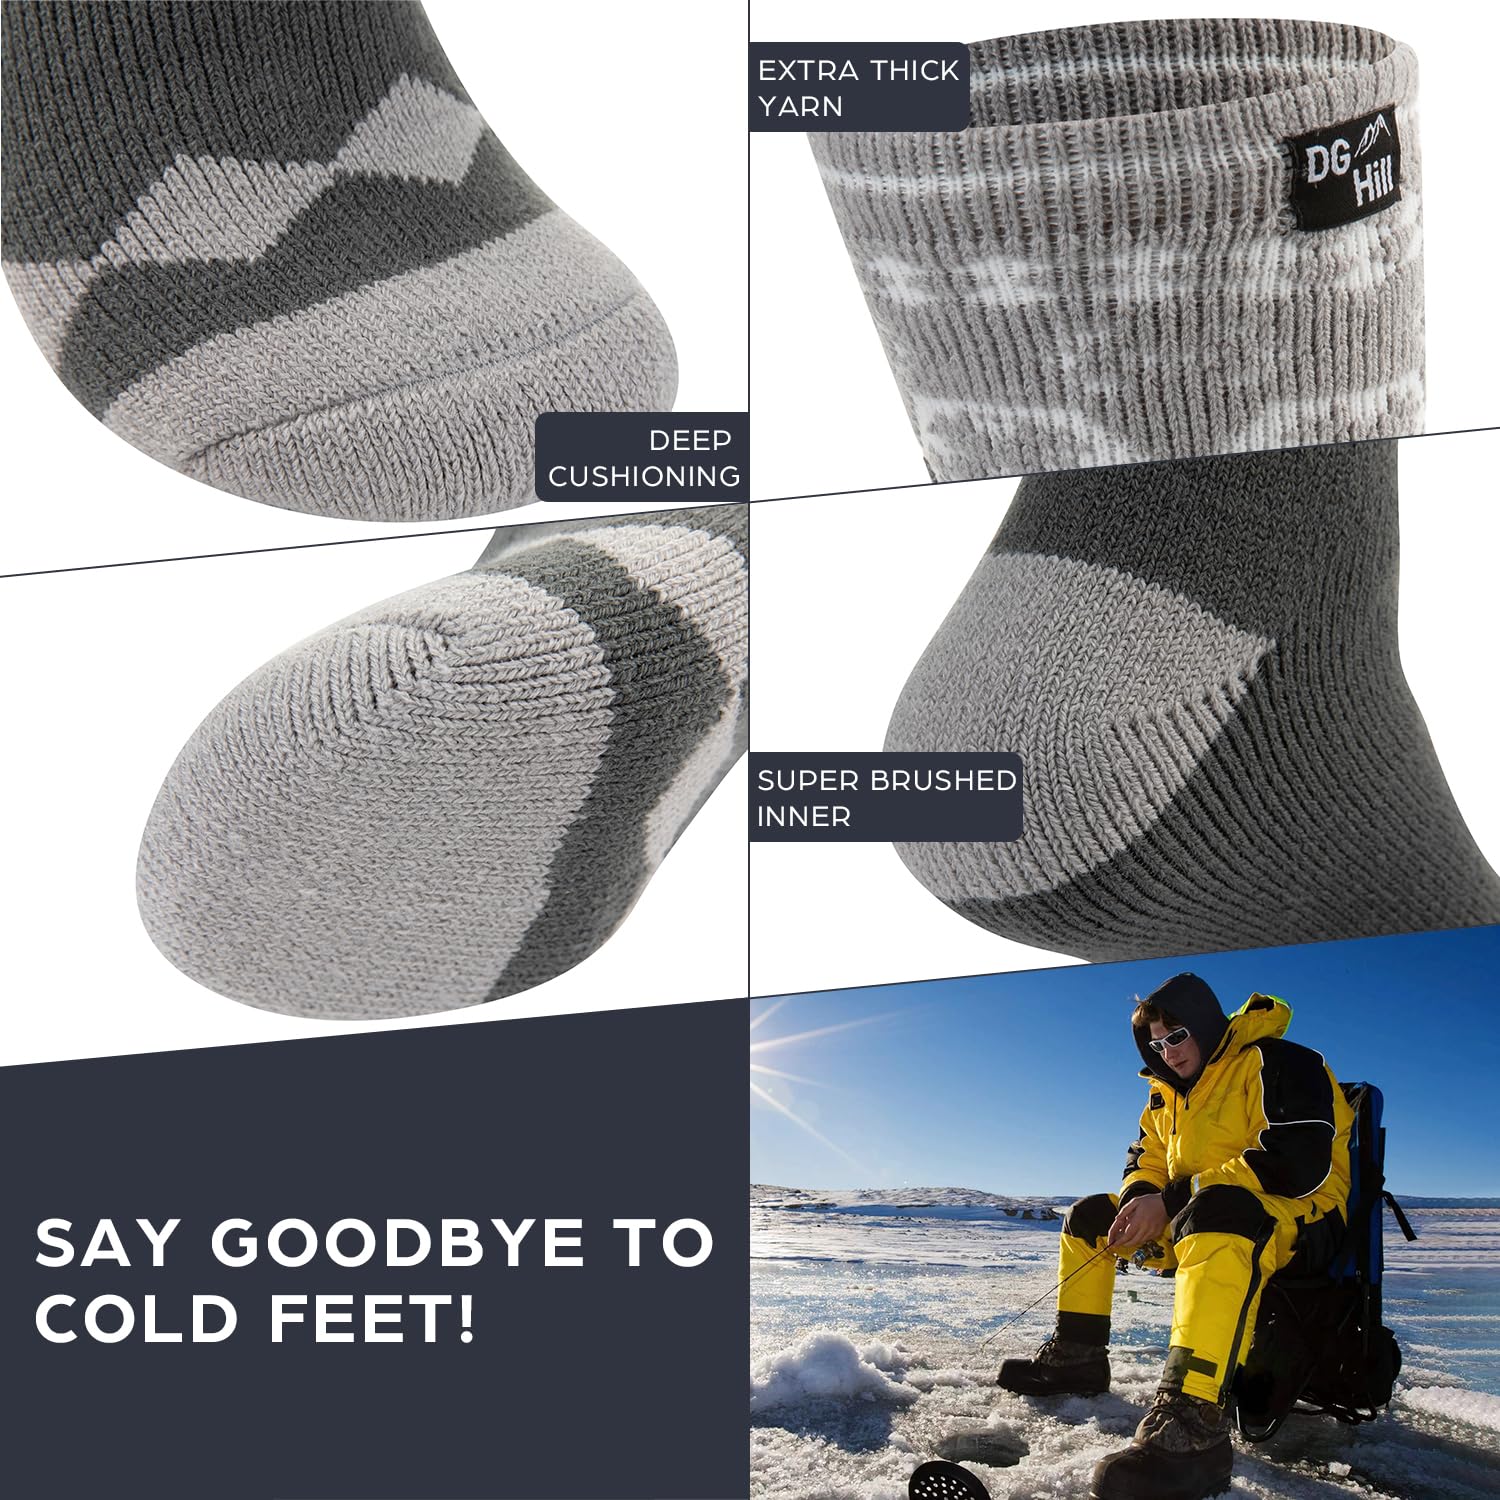 DH Hill Warm Thermal Socks - Warming Winter Socks for Cold Weather - Boot Heated Socks for Hiking Hunting Cycling Athletic Socks